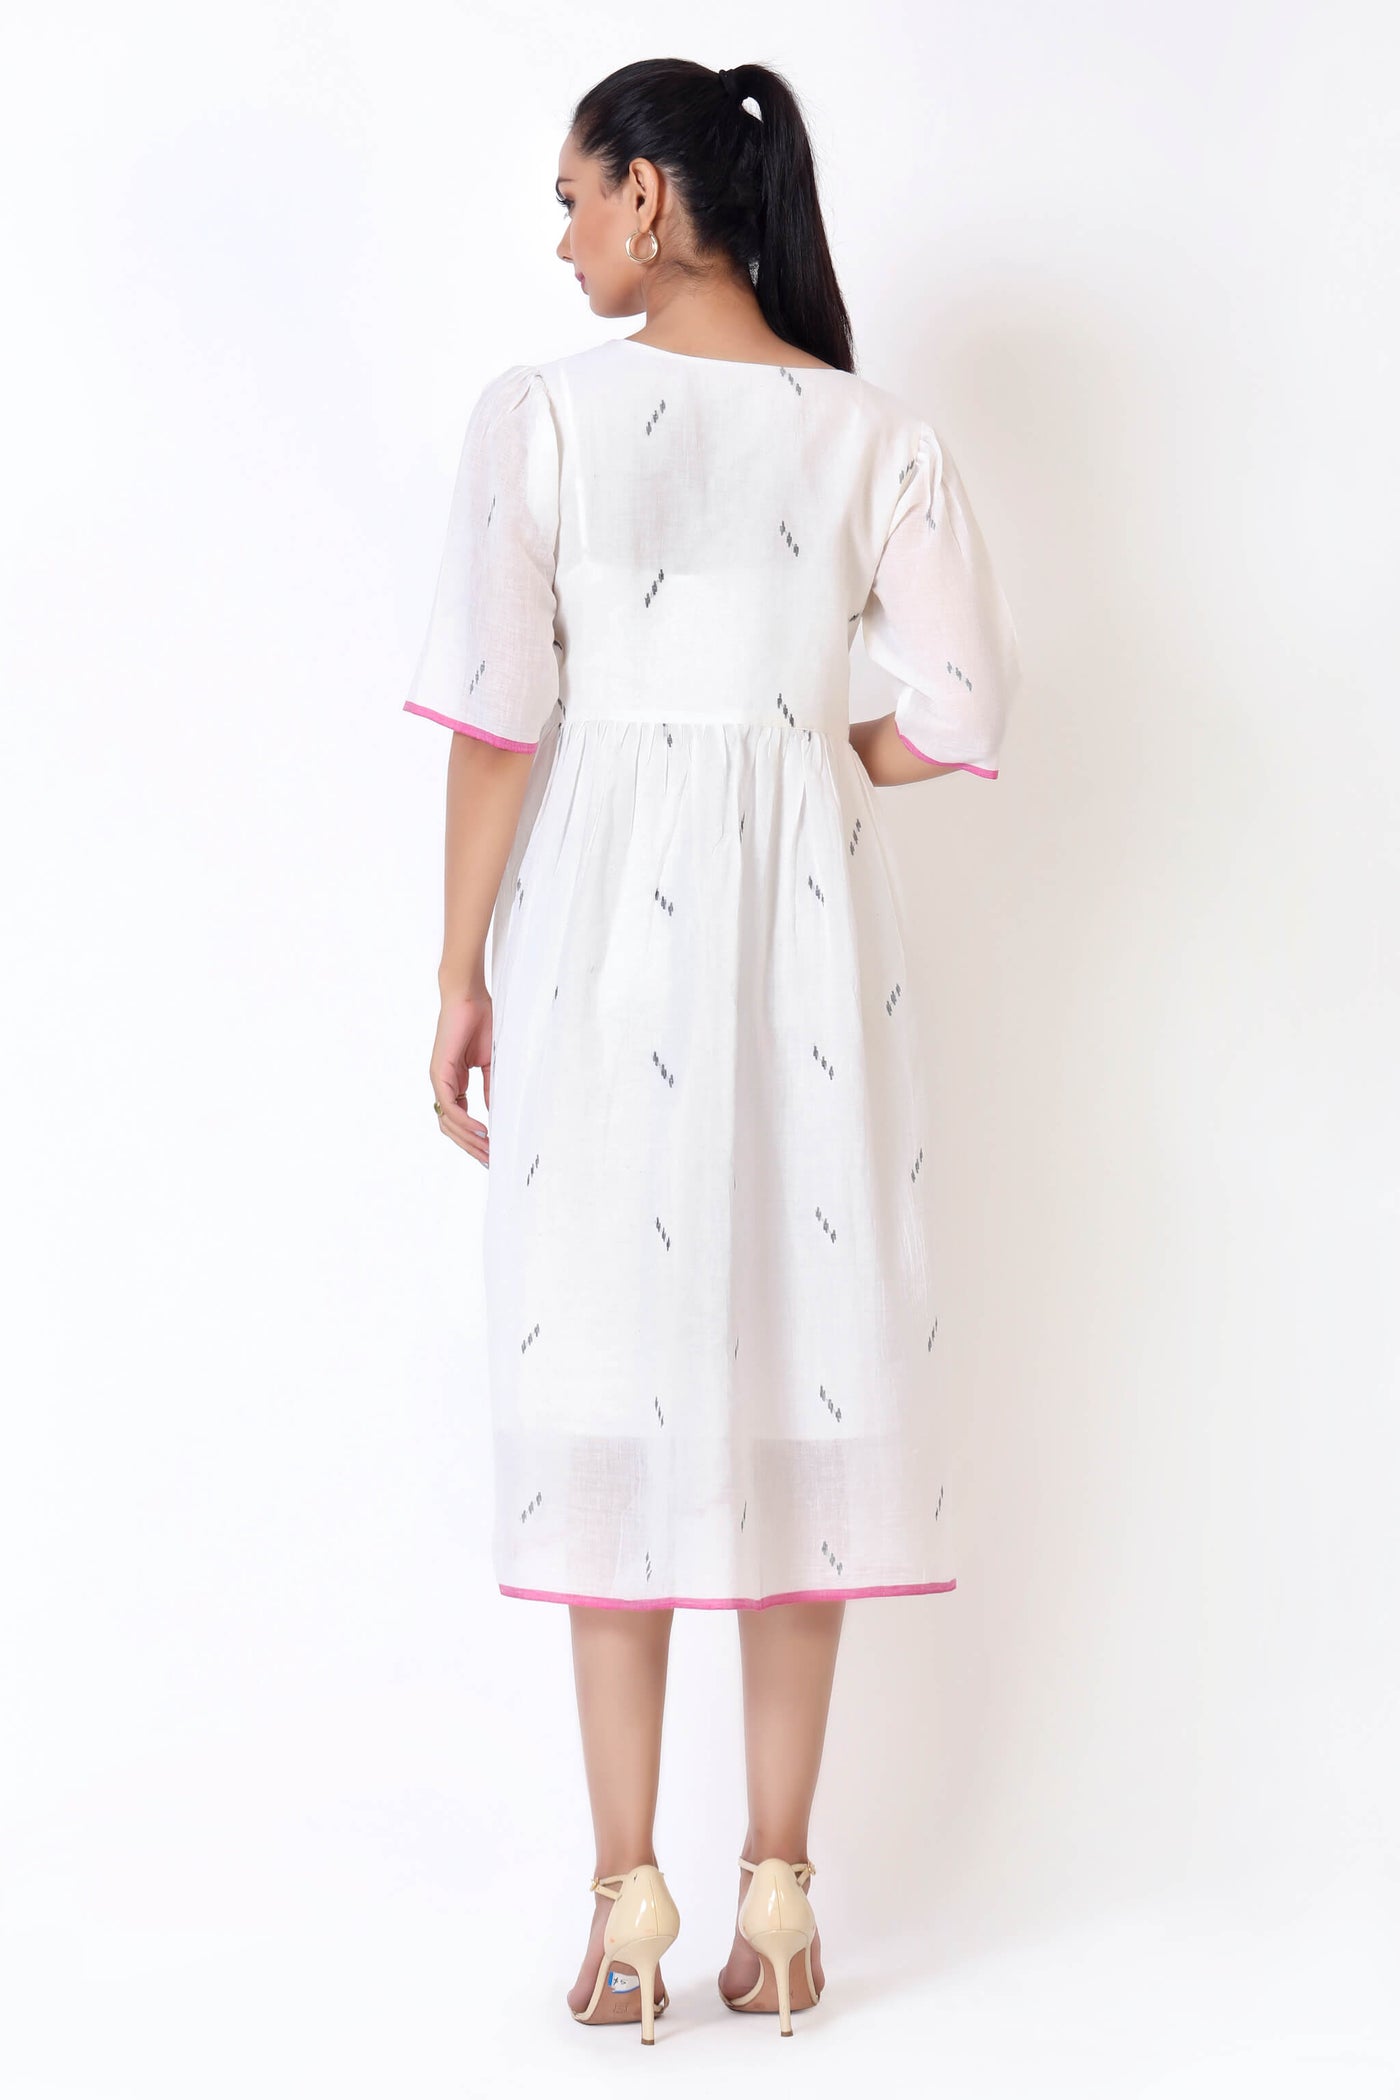 The Jamdani Side Tie Dress - Off-white with a hint of pink